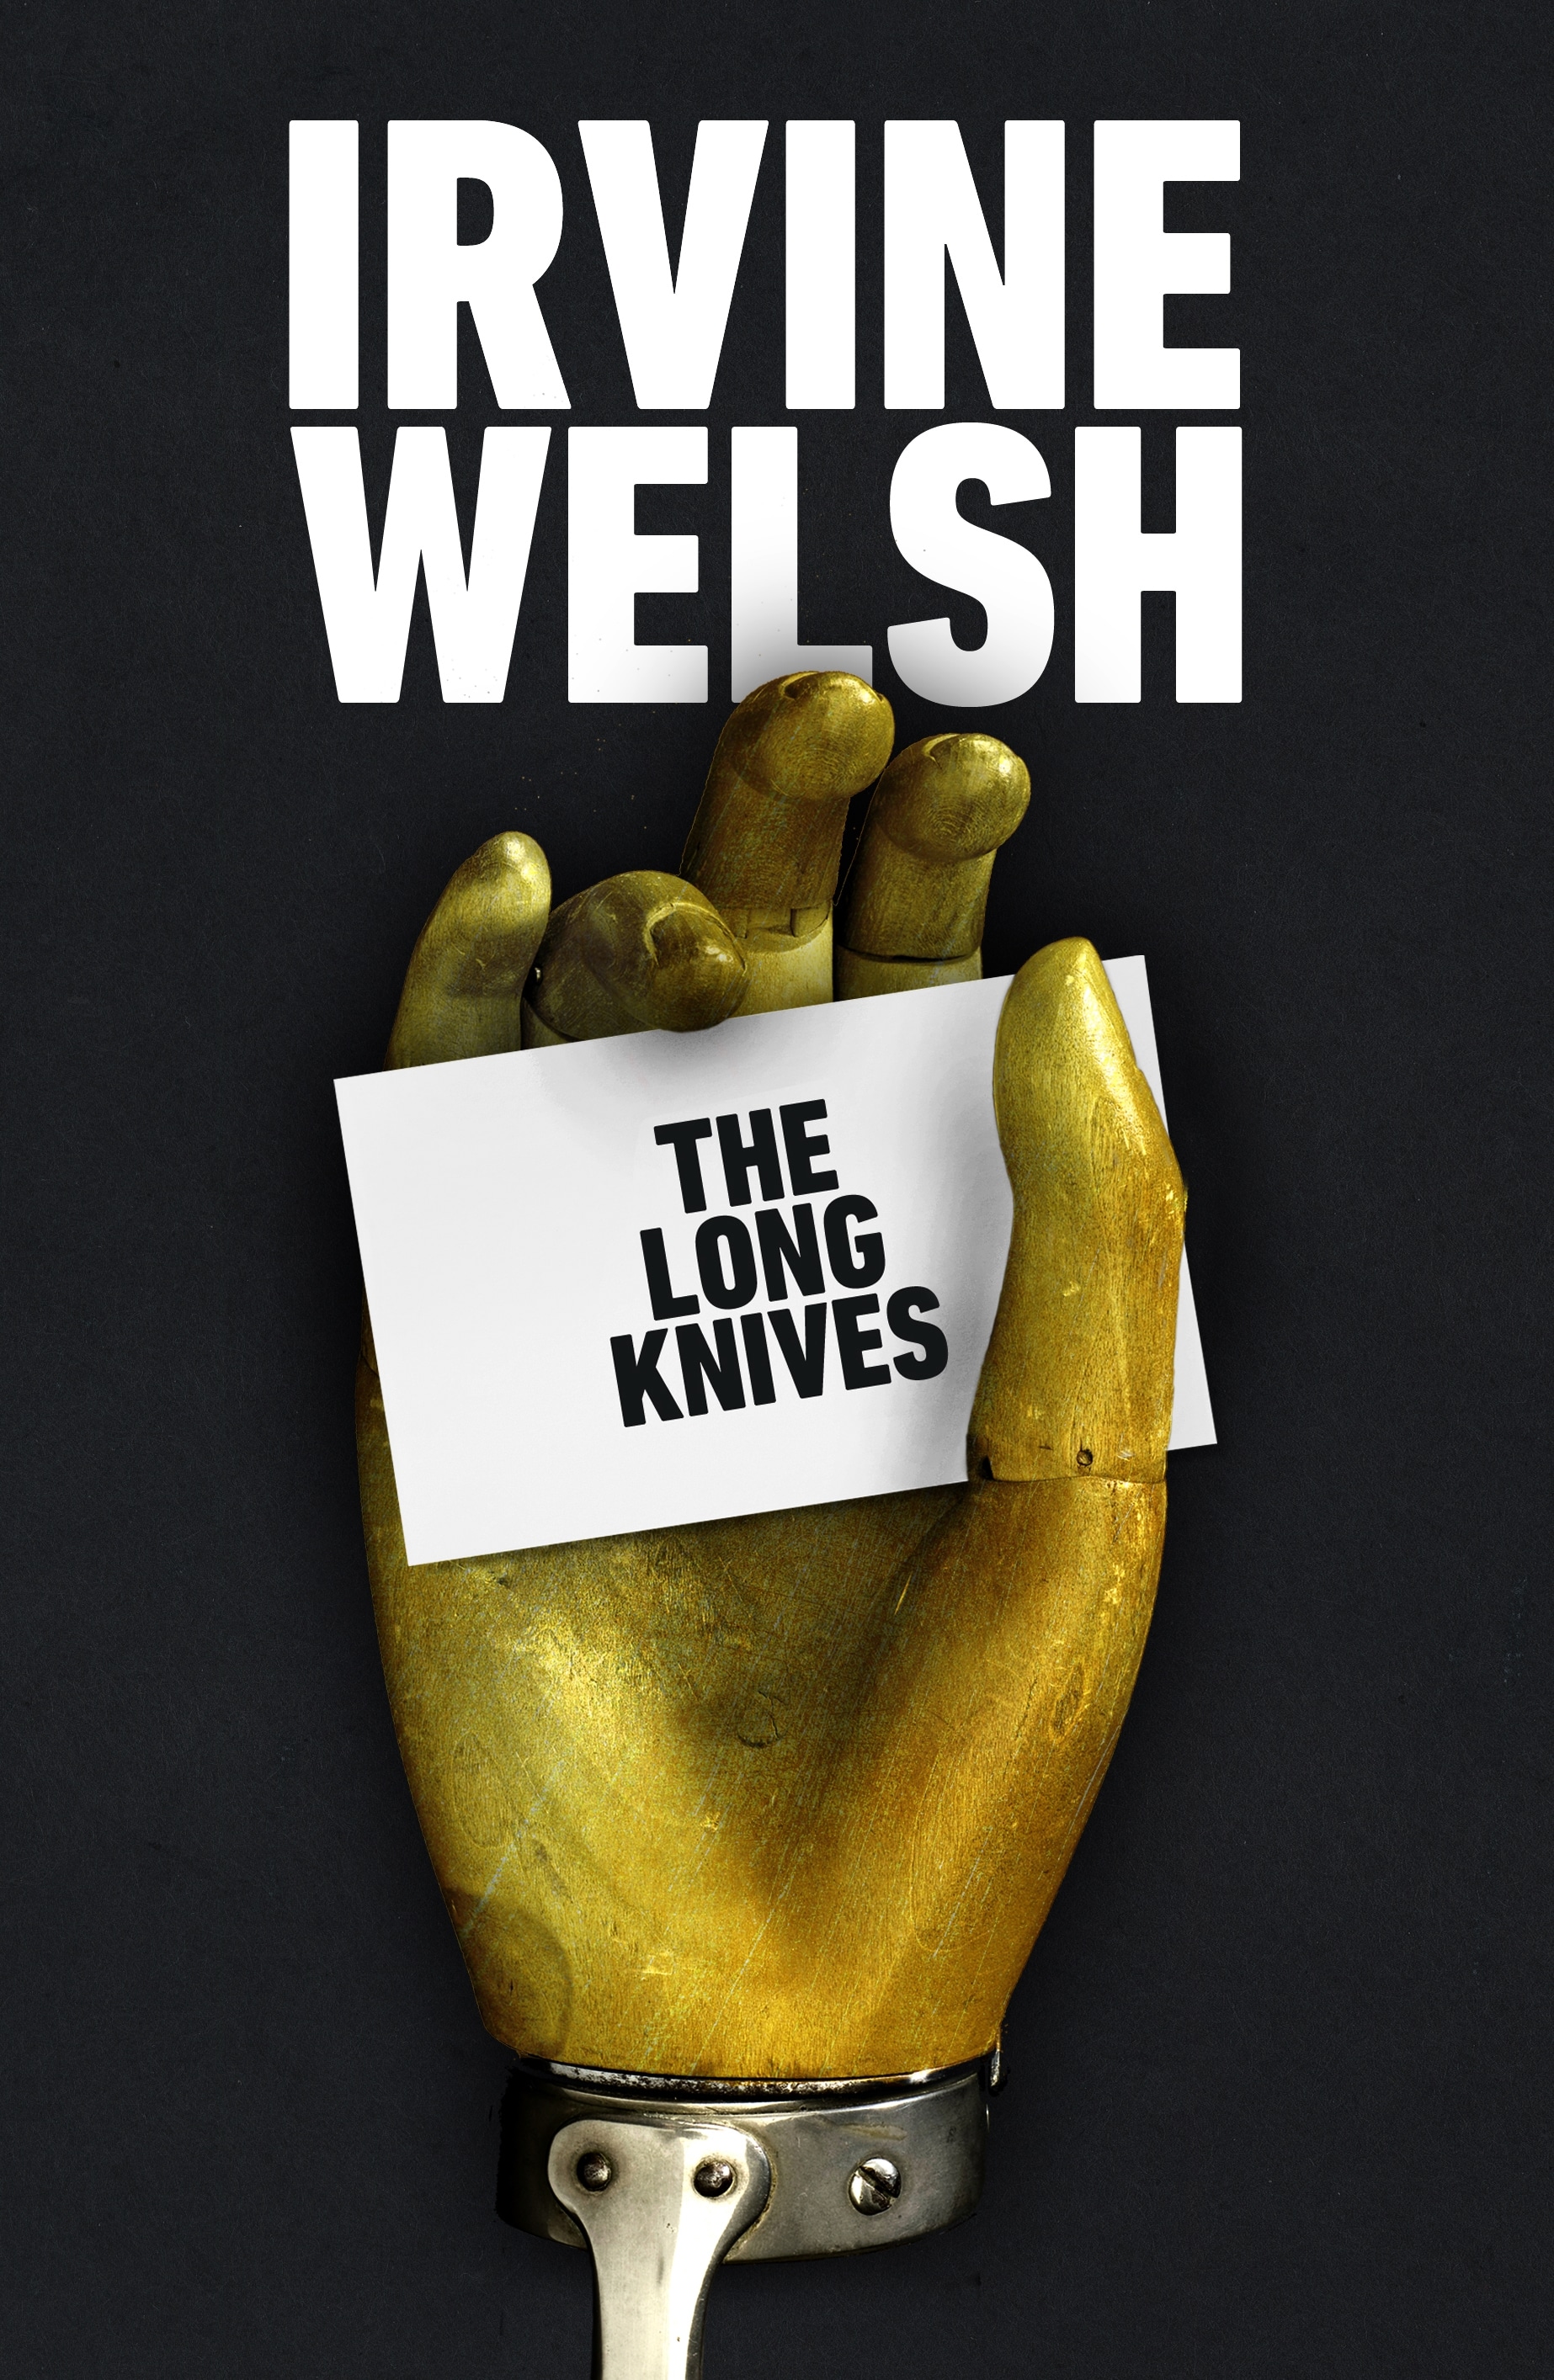 Book “The Long Knives” by Irvine Welsh — August 25, 2022